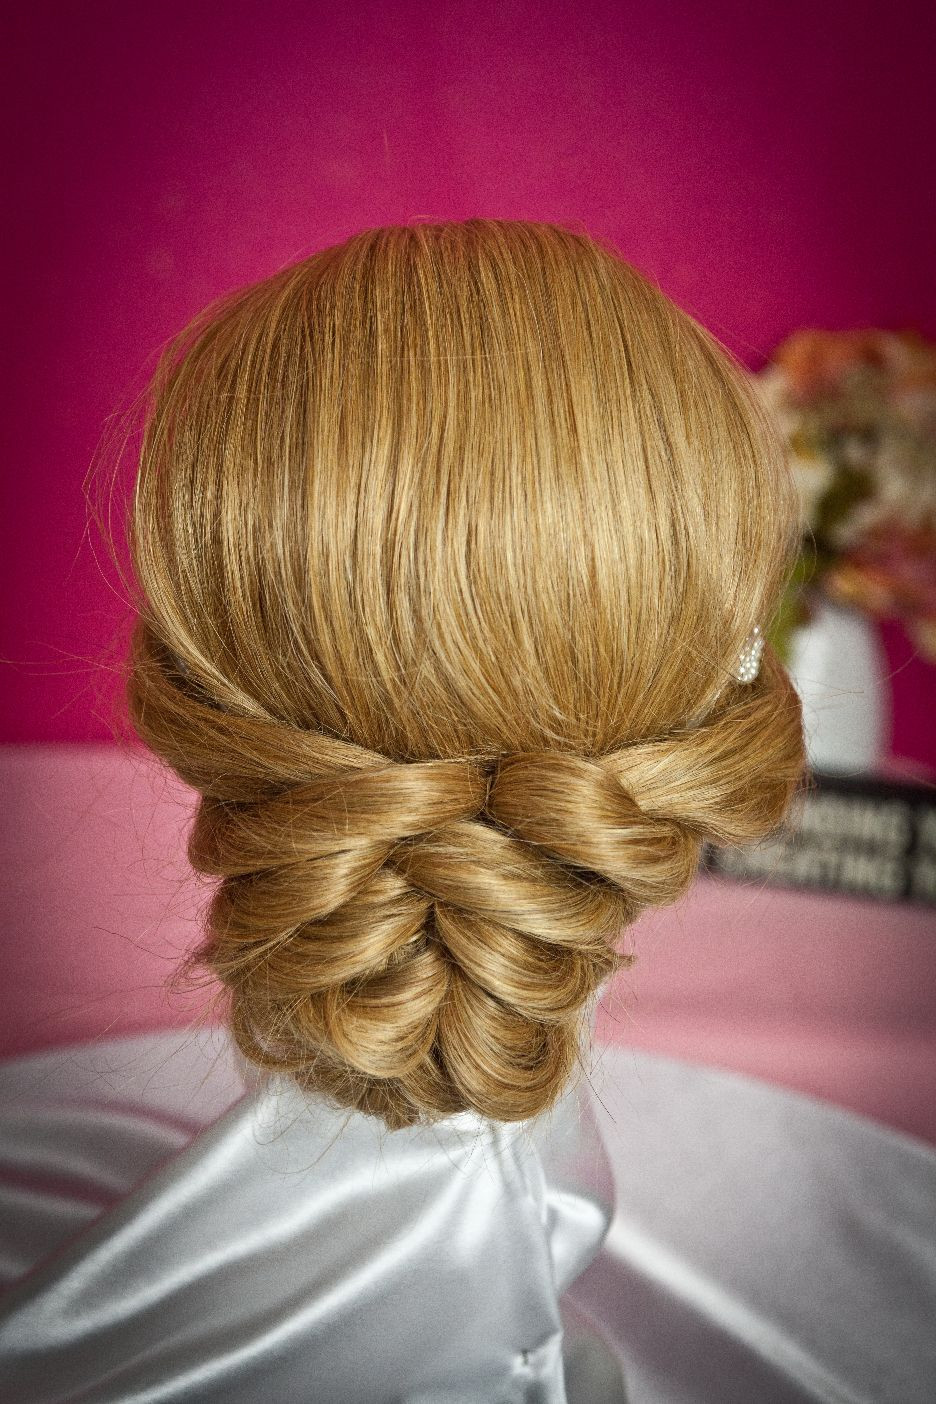 Do It Yourself Updo Hairstyle
 Pin by HairsbyChristine Frank on Do It Yourself Updos